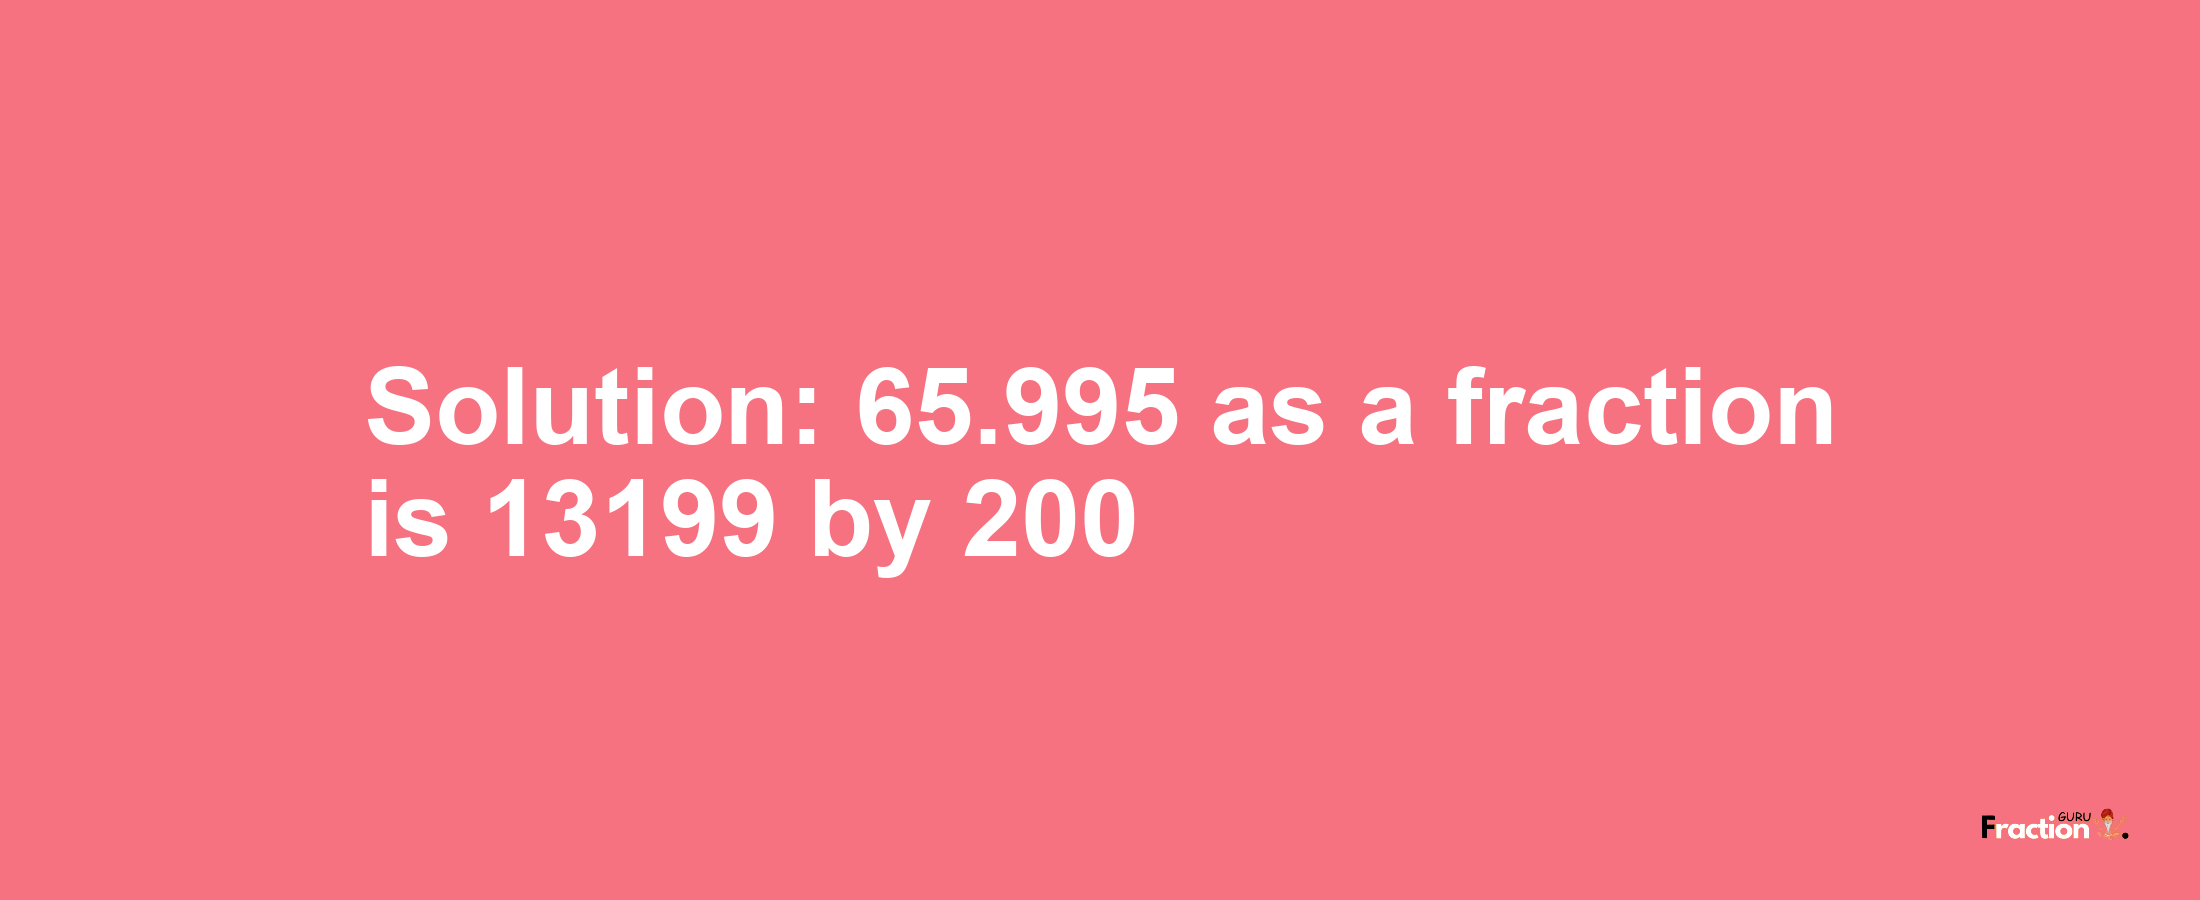 Solution:65.995 as a fraction is 13199/200